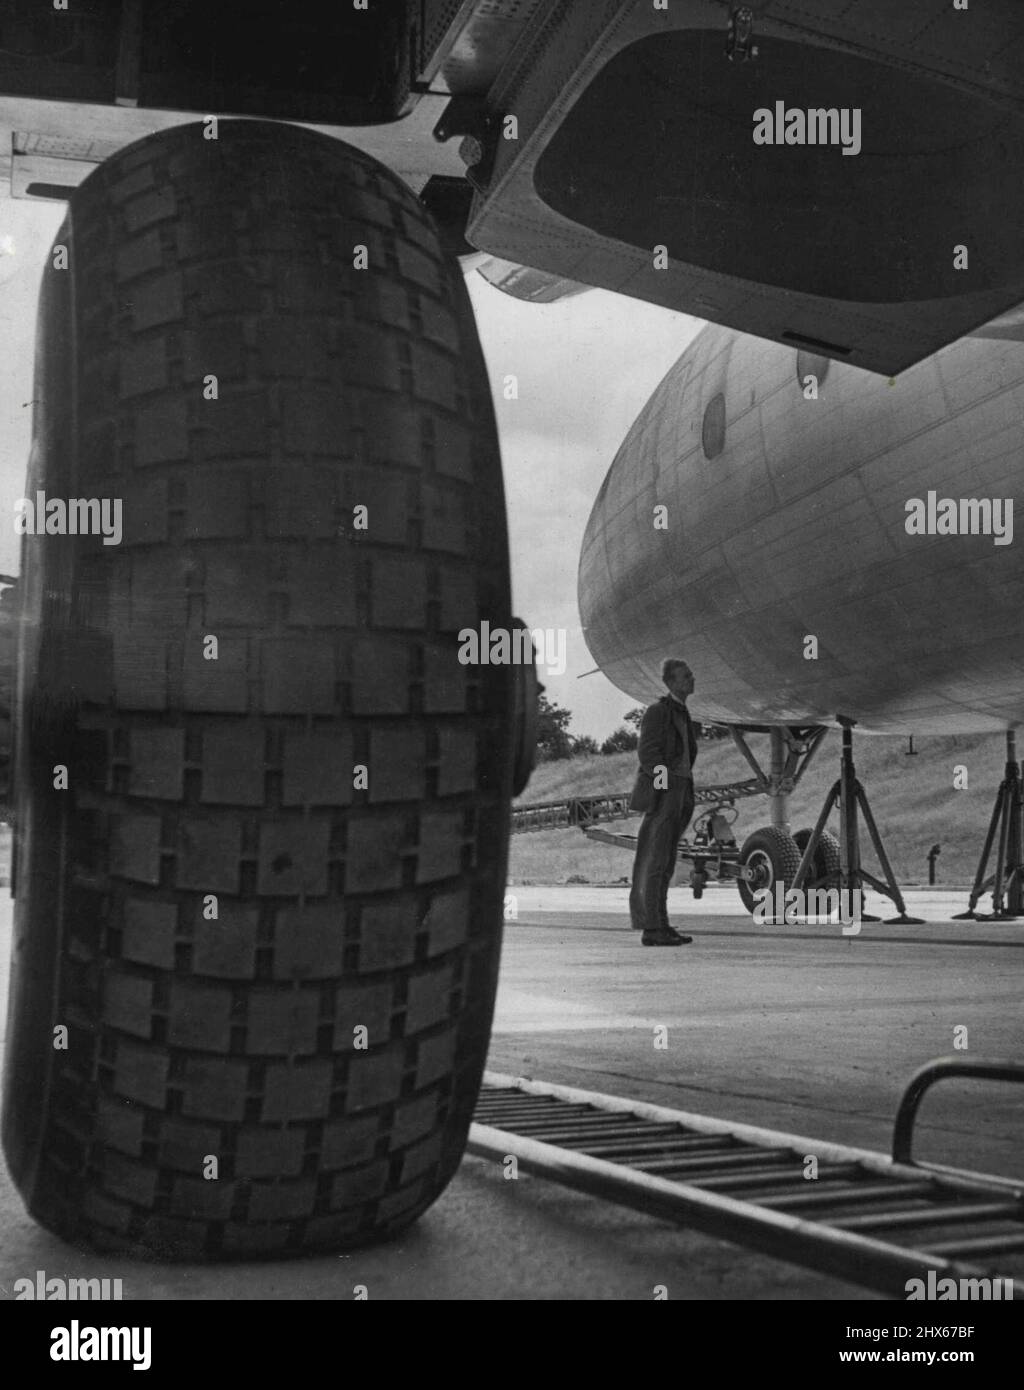 Wheel Of Air Giant -- This view of one of the huge undercarriage wheels of Britain's 125-ton air giant, Brabazon I, the world's largest land plane, suggests with startling clarity the immense size of the aircraft. Designed to carry 100 passengers, the estimated cost of the Brabazon is about £6,000,000. September 14, 1948. Stock Photo